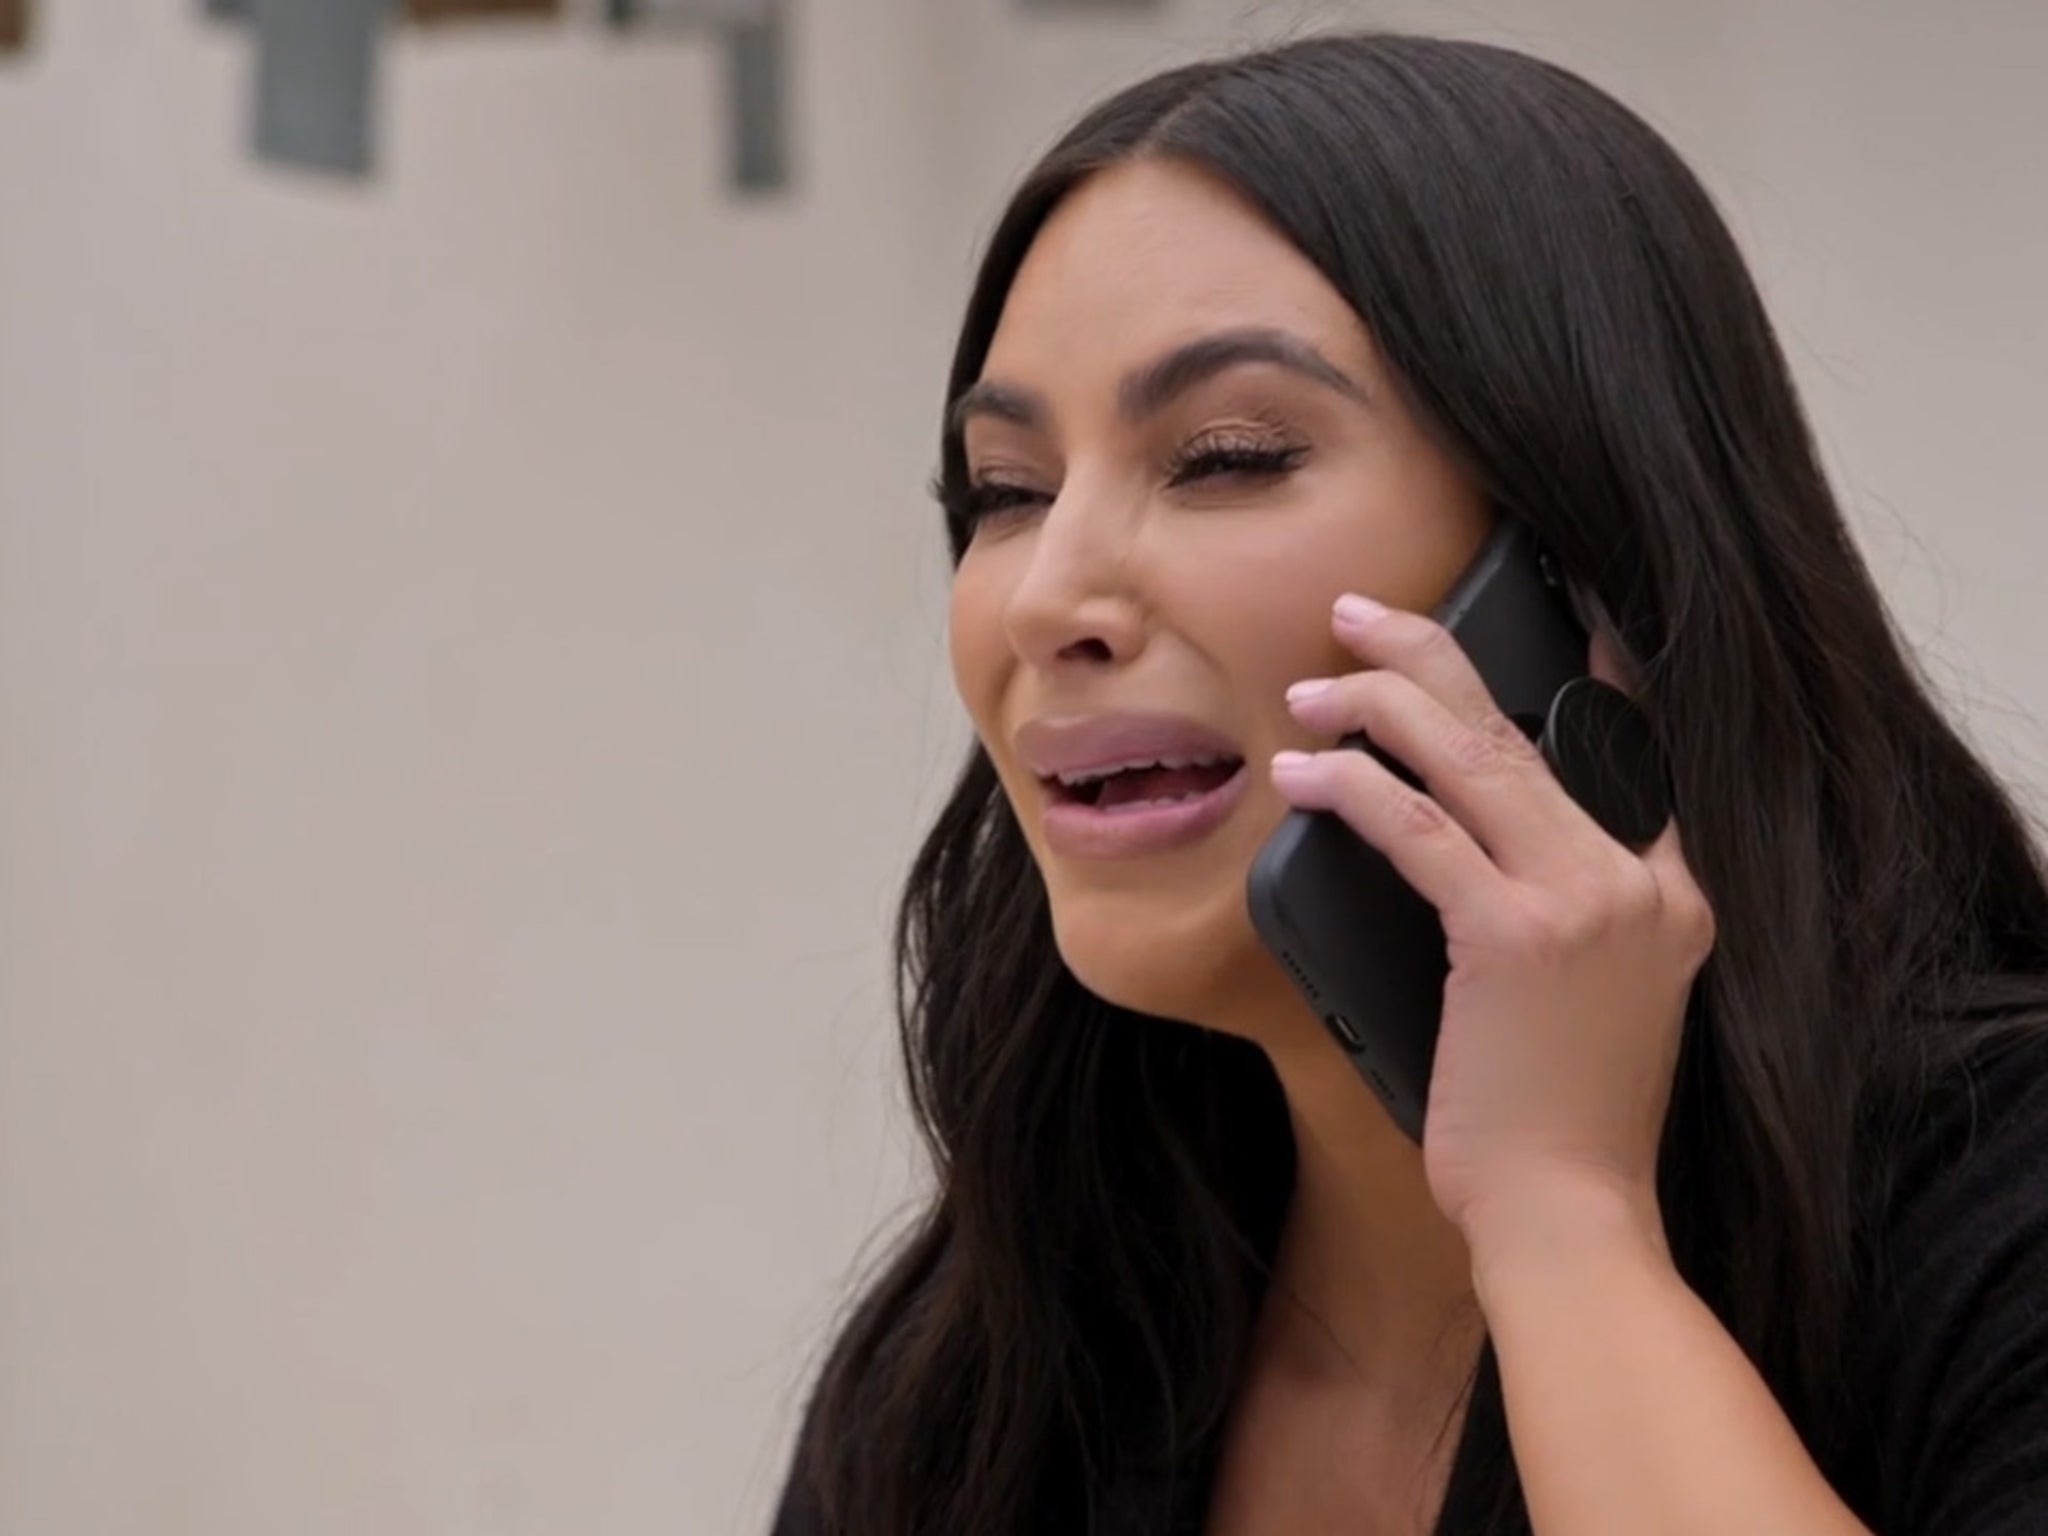 Kim Kardashian Sobs Over Sex Tape with Ray J in Graphic Call with Lawyer